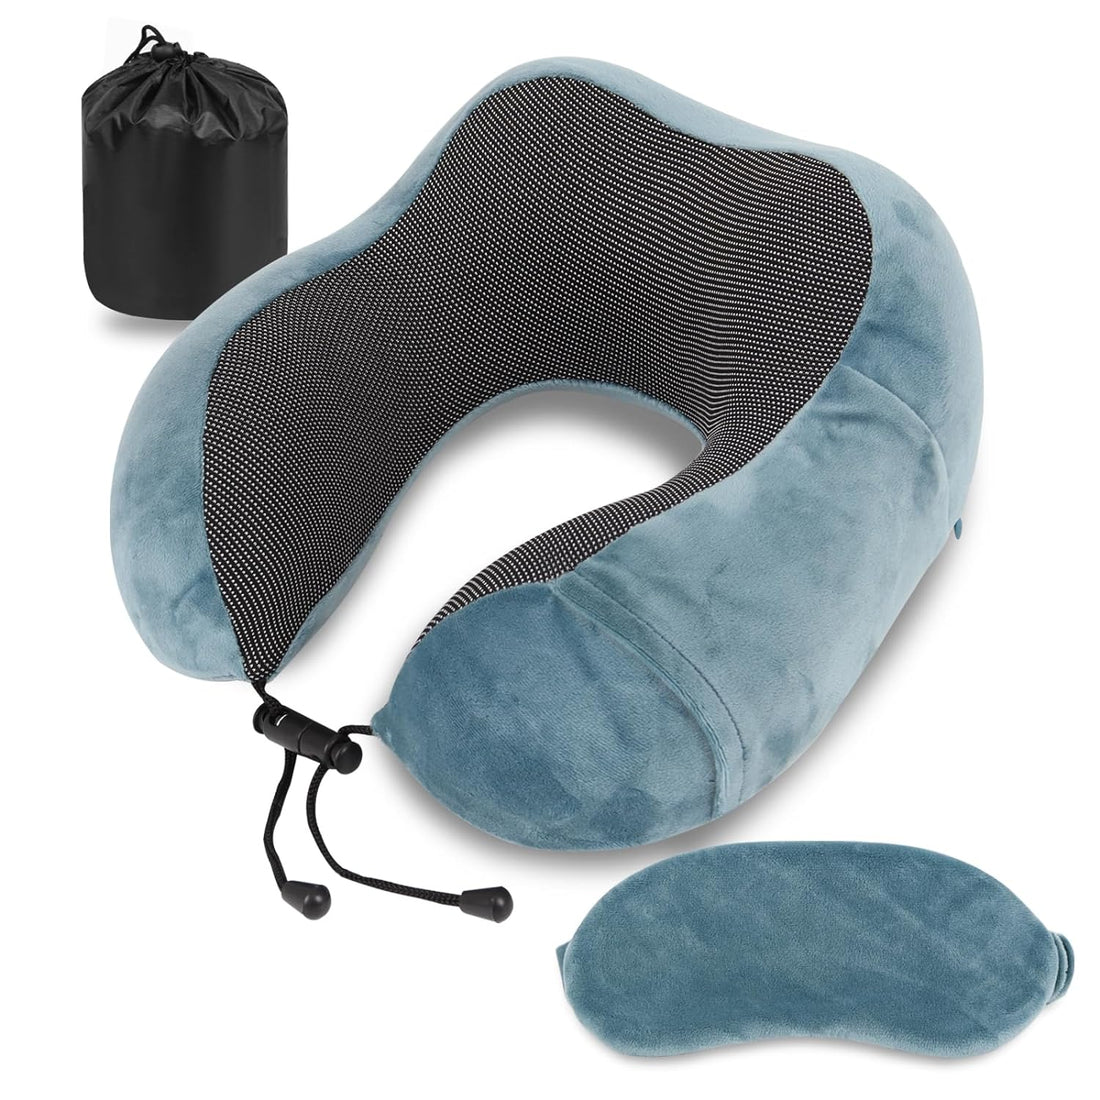 Pure Memory Foam Travel Pillow Set for Adults - Comfortable & Breathable Removable Cover, Airplane Travel Kit with Eye Mask & Portable Storage Bags for Plane Accessories - Blue